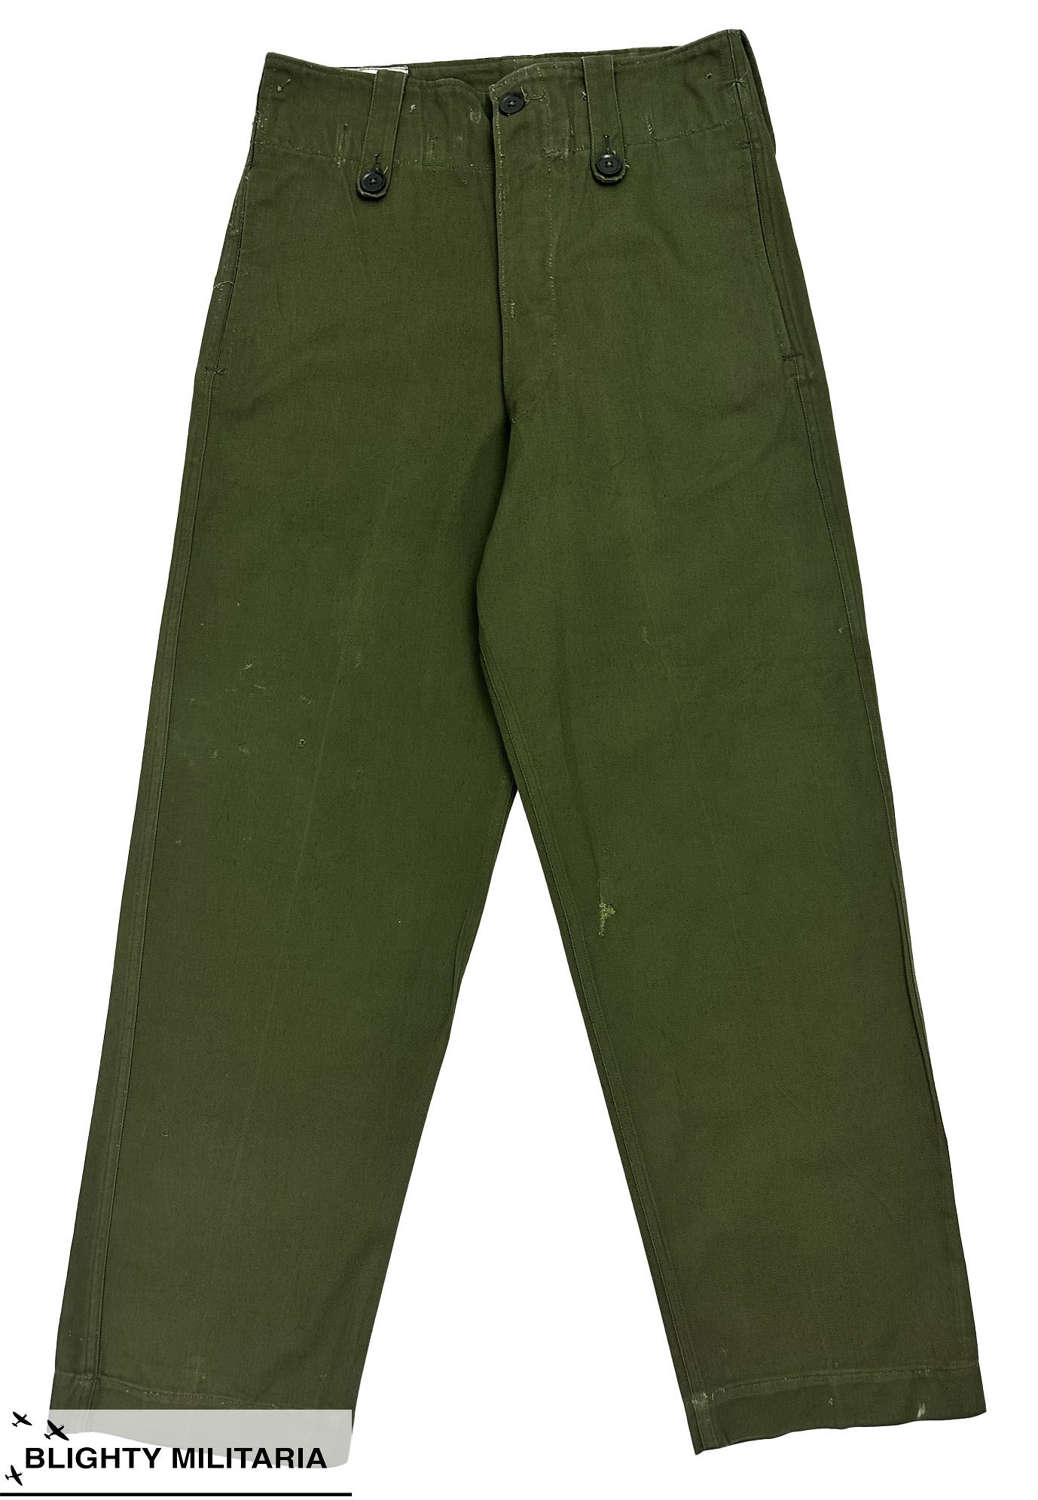 Original 1960s British Army 'Trousers Overall Green' - Size 30 x 28.5